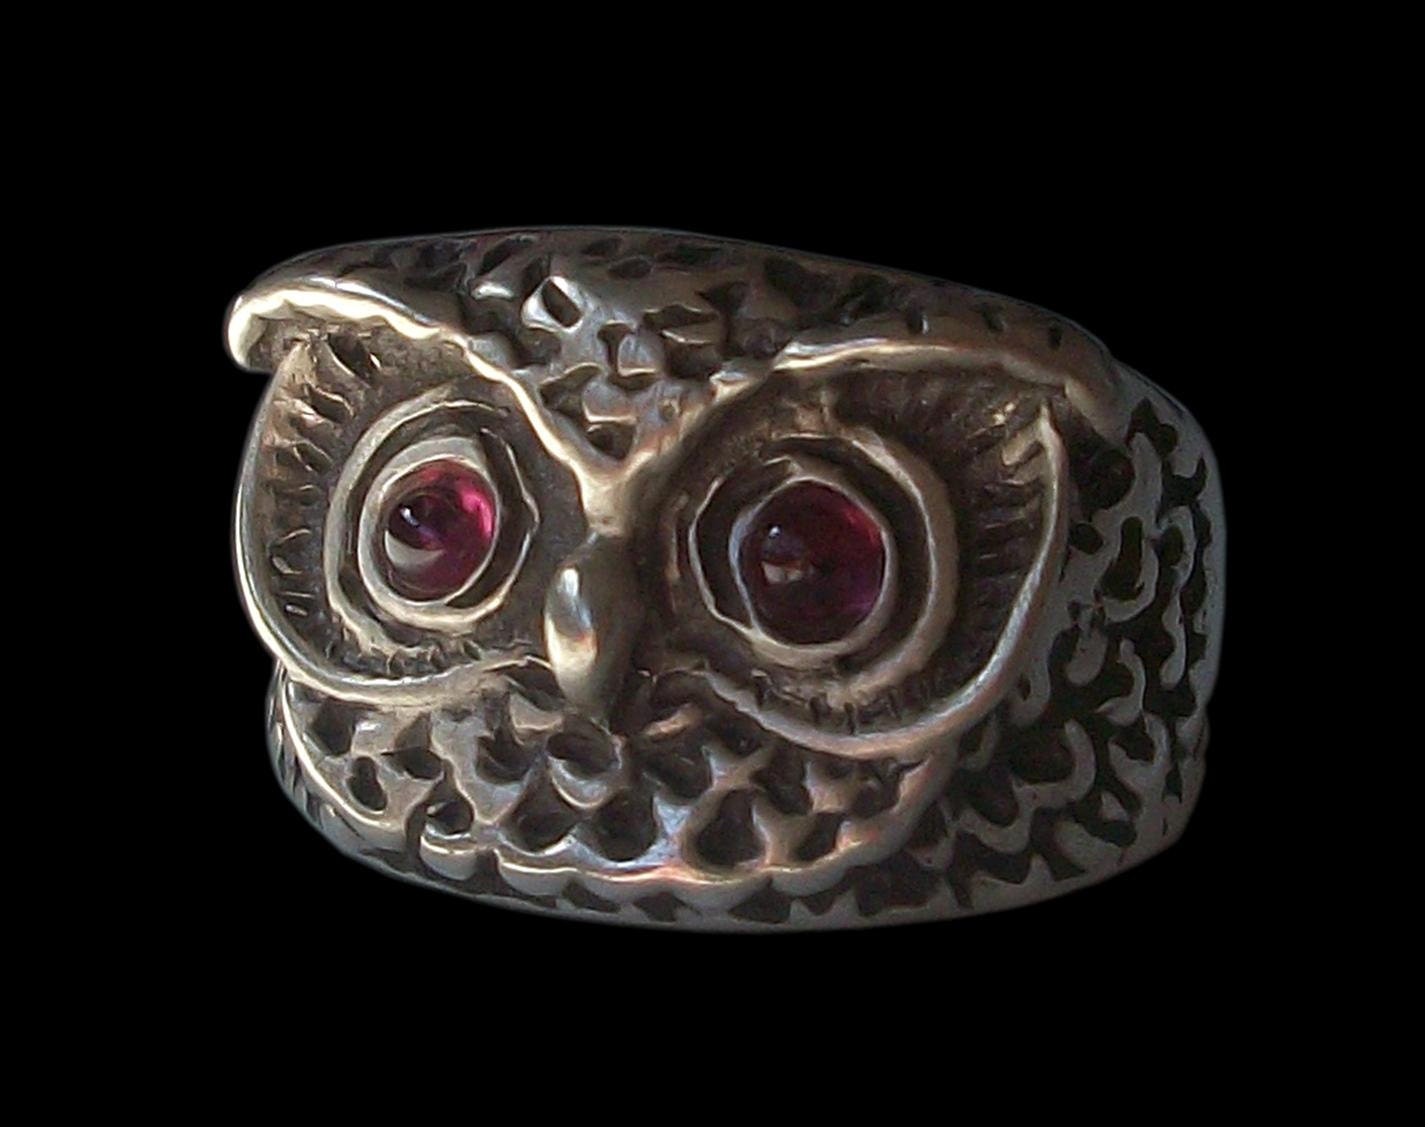 Owl ring - Sterling Silver Owl ring with garnet - All Sizes